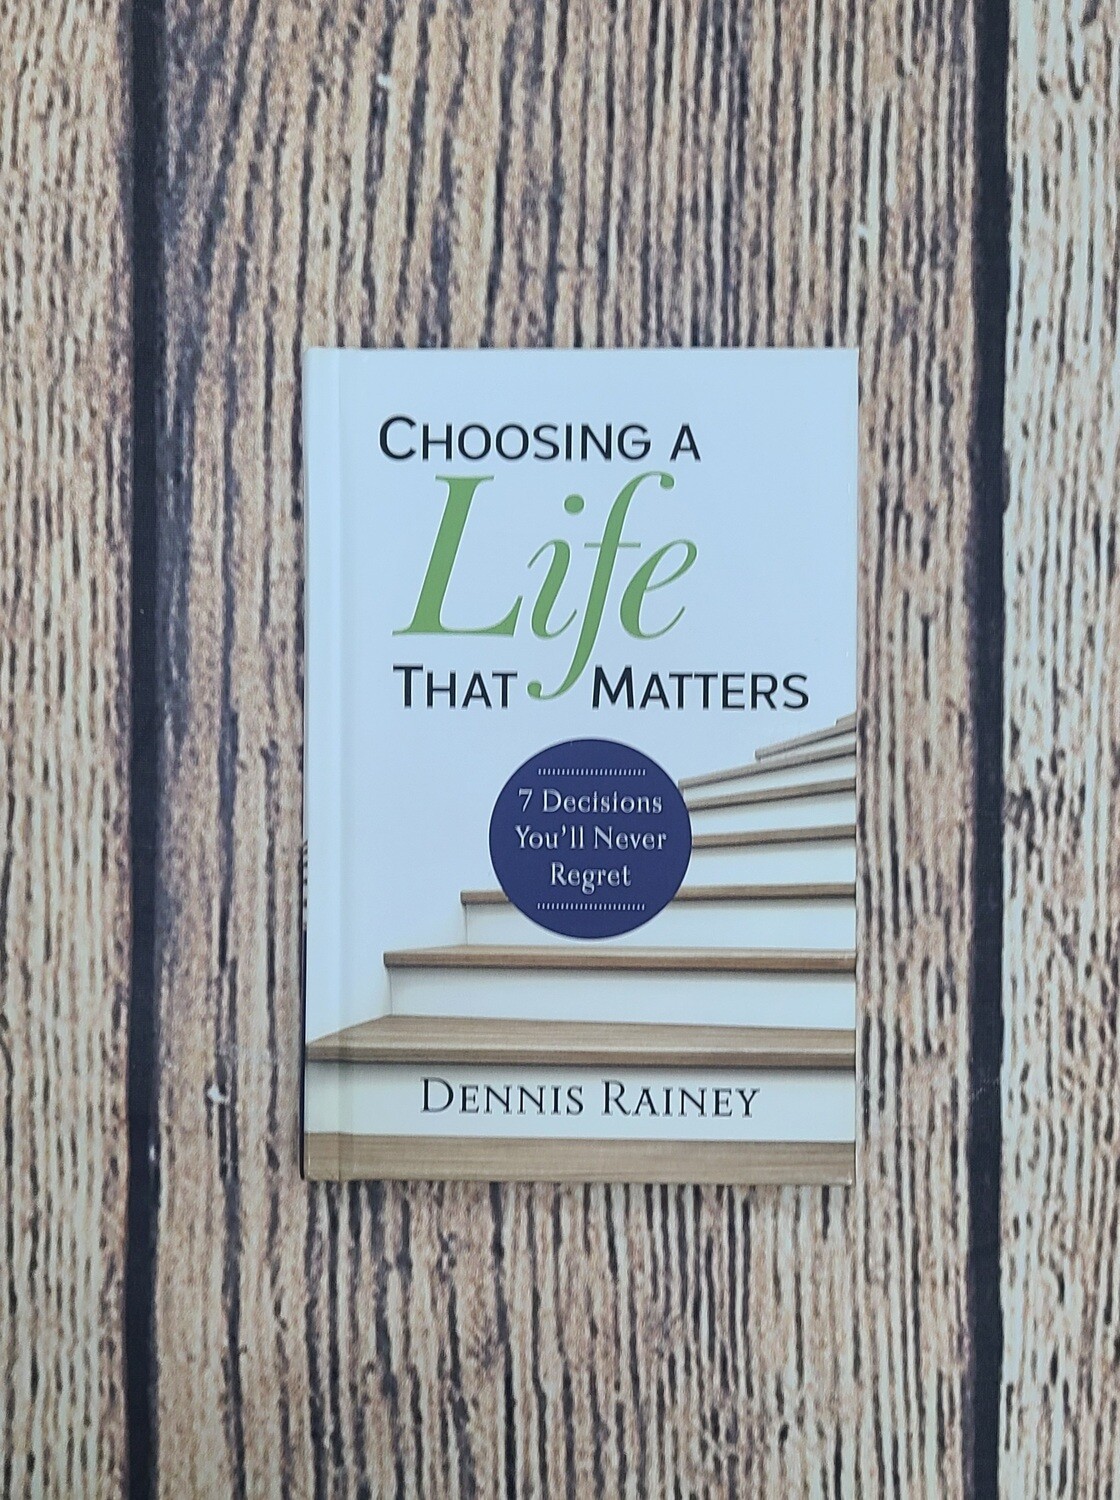 Choosing a Life that Matters by Dennis Rainey